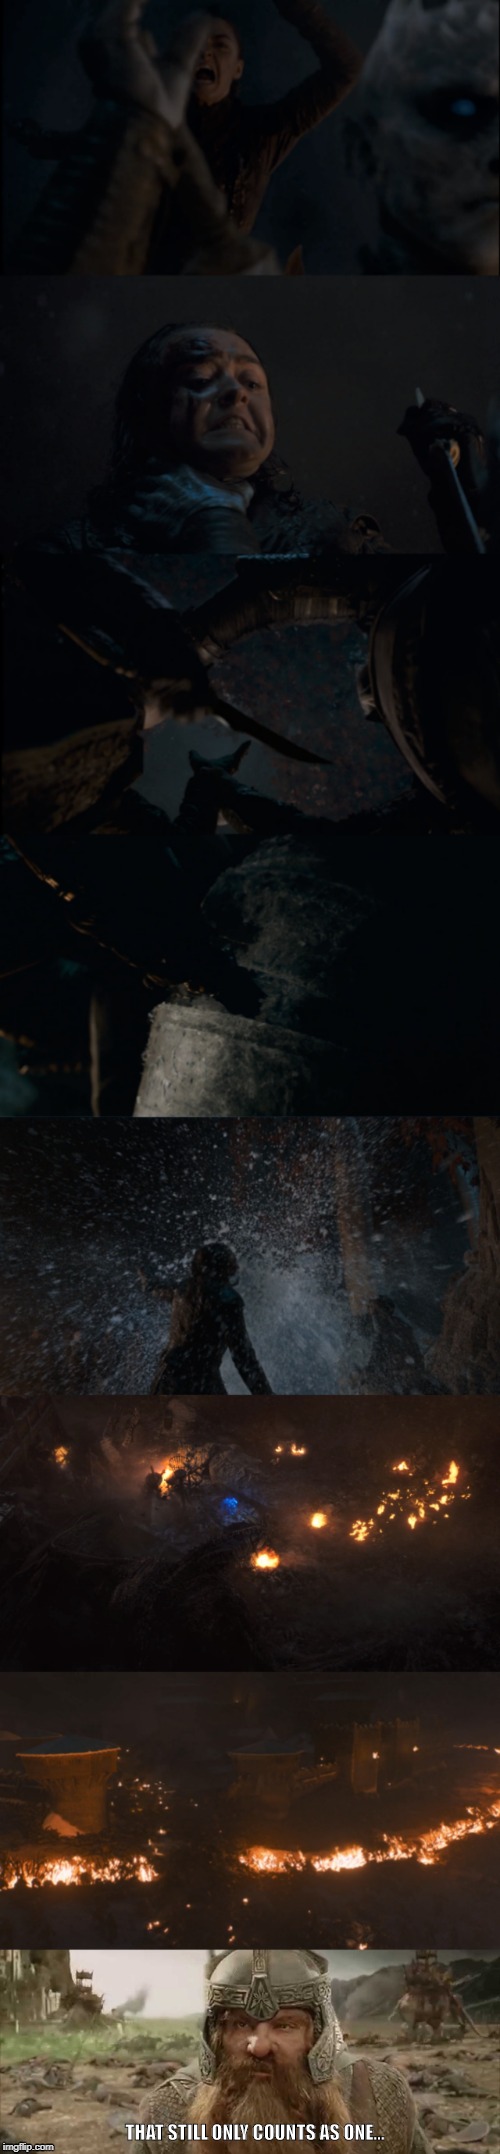 GOT It still only counts as one... | THAT STILL ONLY COUNTS AS ONE... | image tagged in game of thrones,gimli,lotr,arya stark,game of thrones arya,got | made w/ Imgflip meme maker